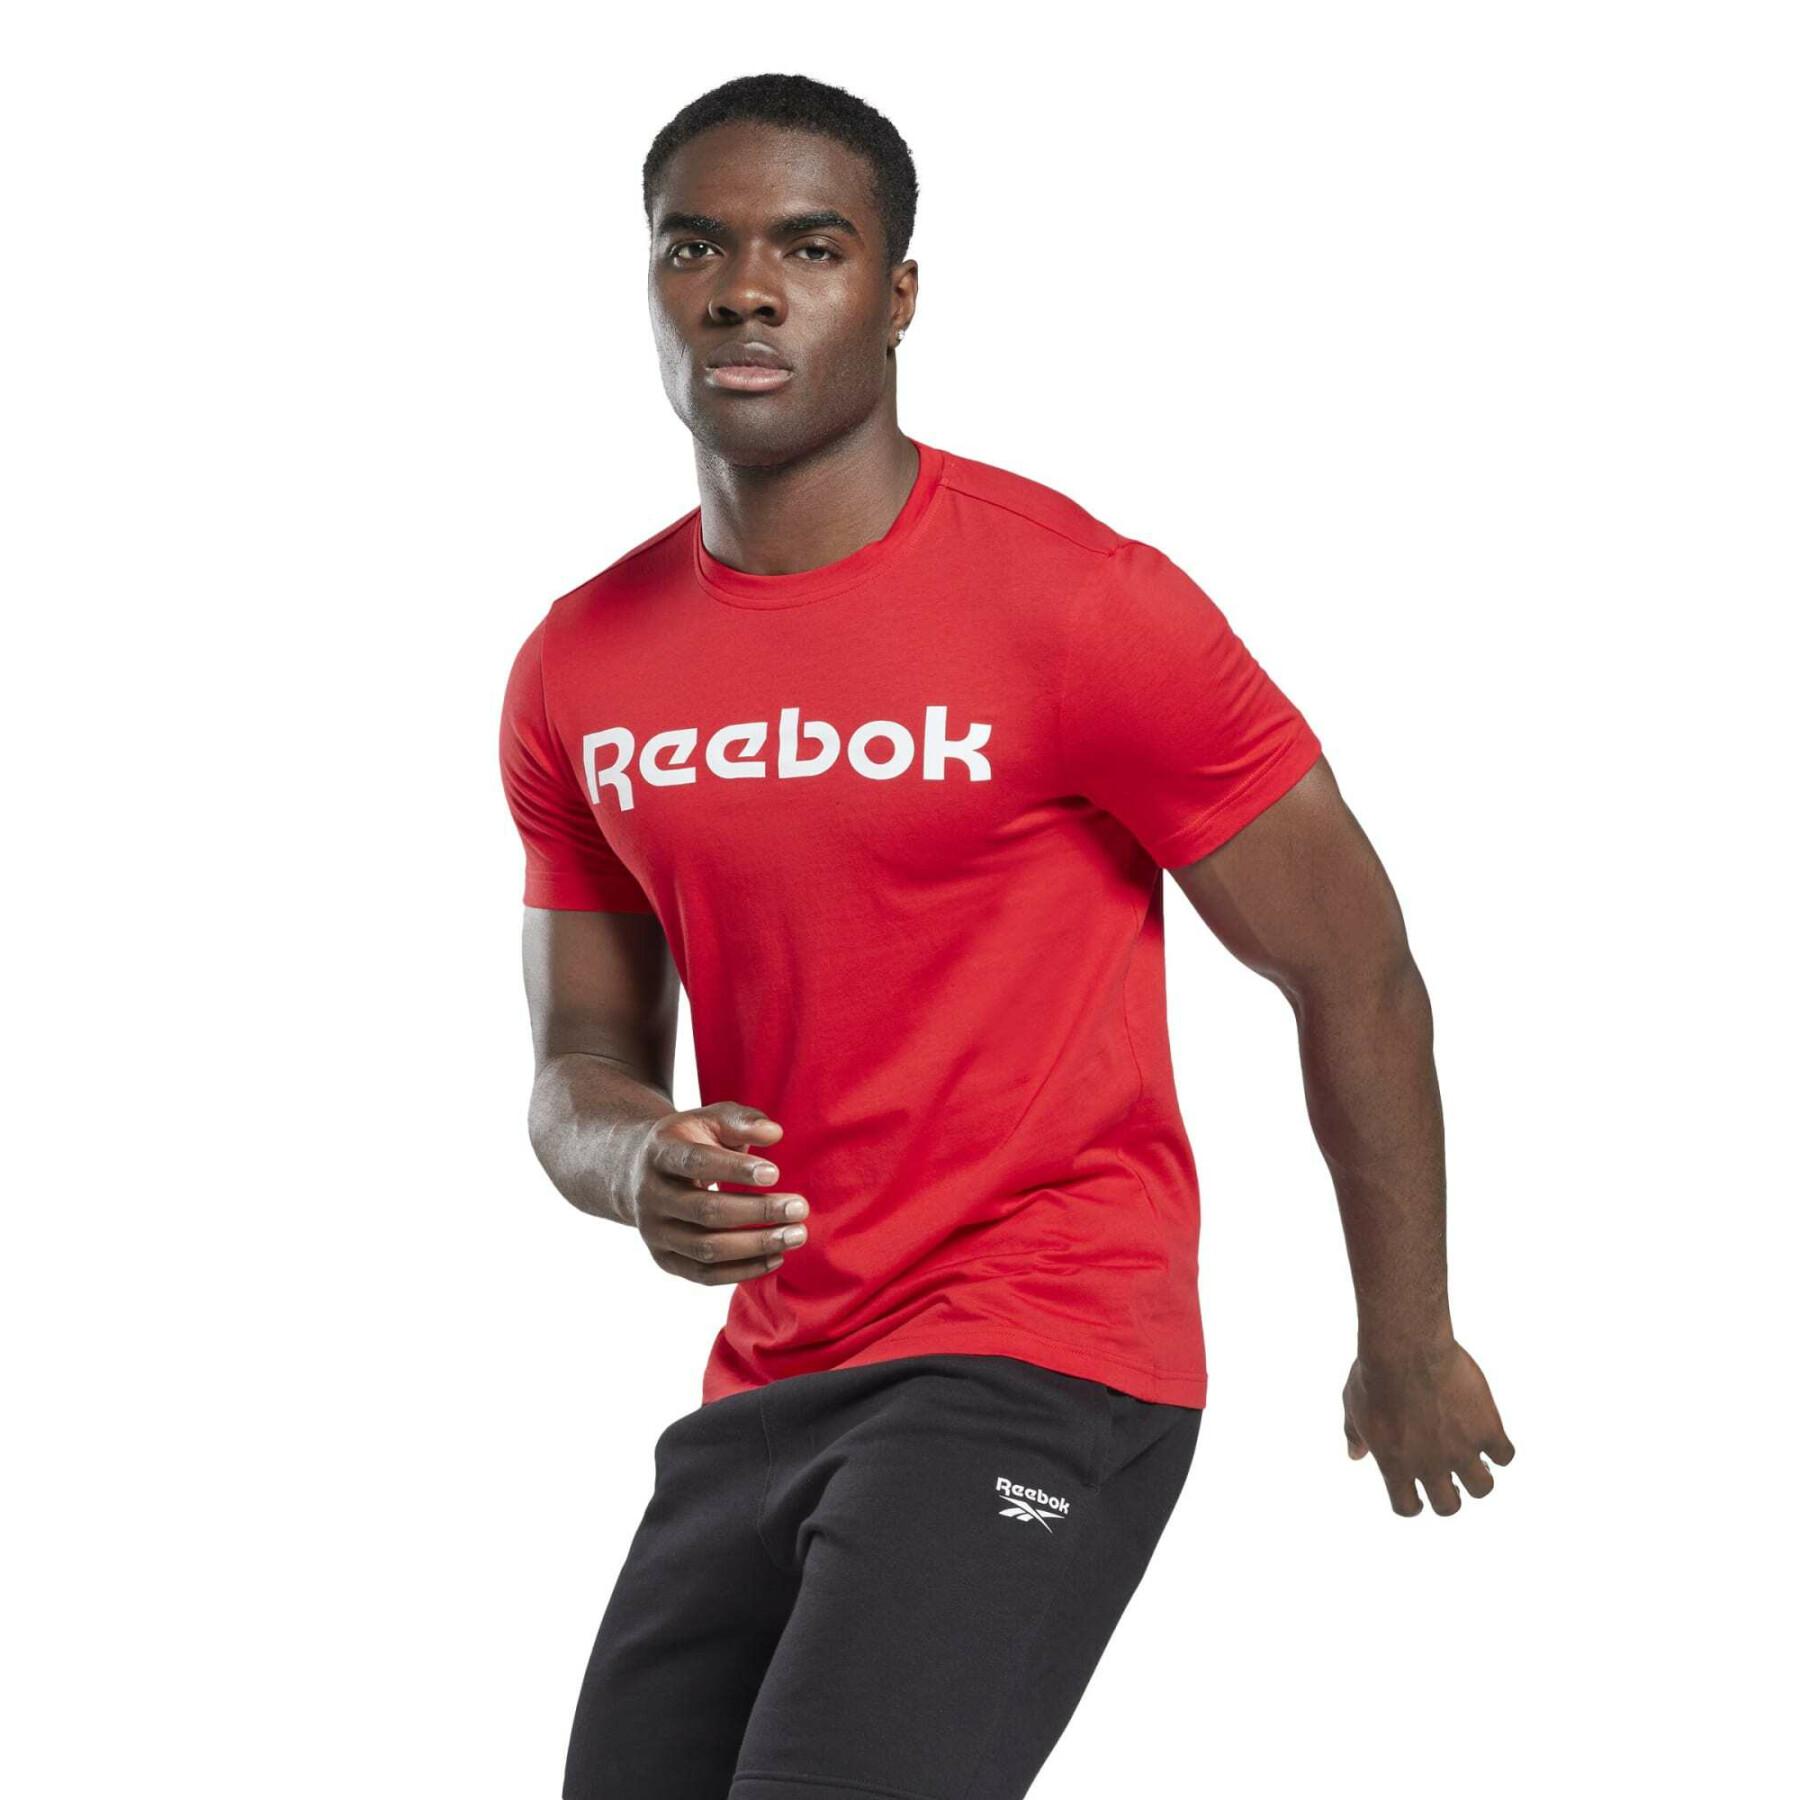 Graphic series T-shirt with linear logo Reebok - T-shirts - Men's Clothing  - Fitness